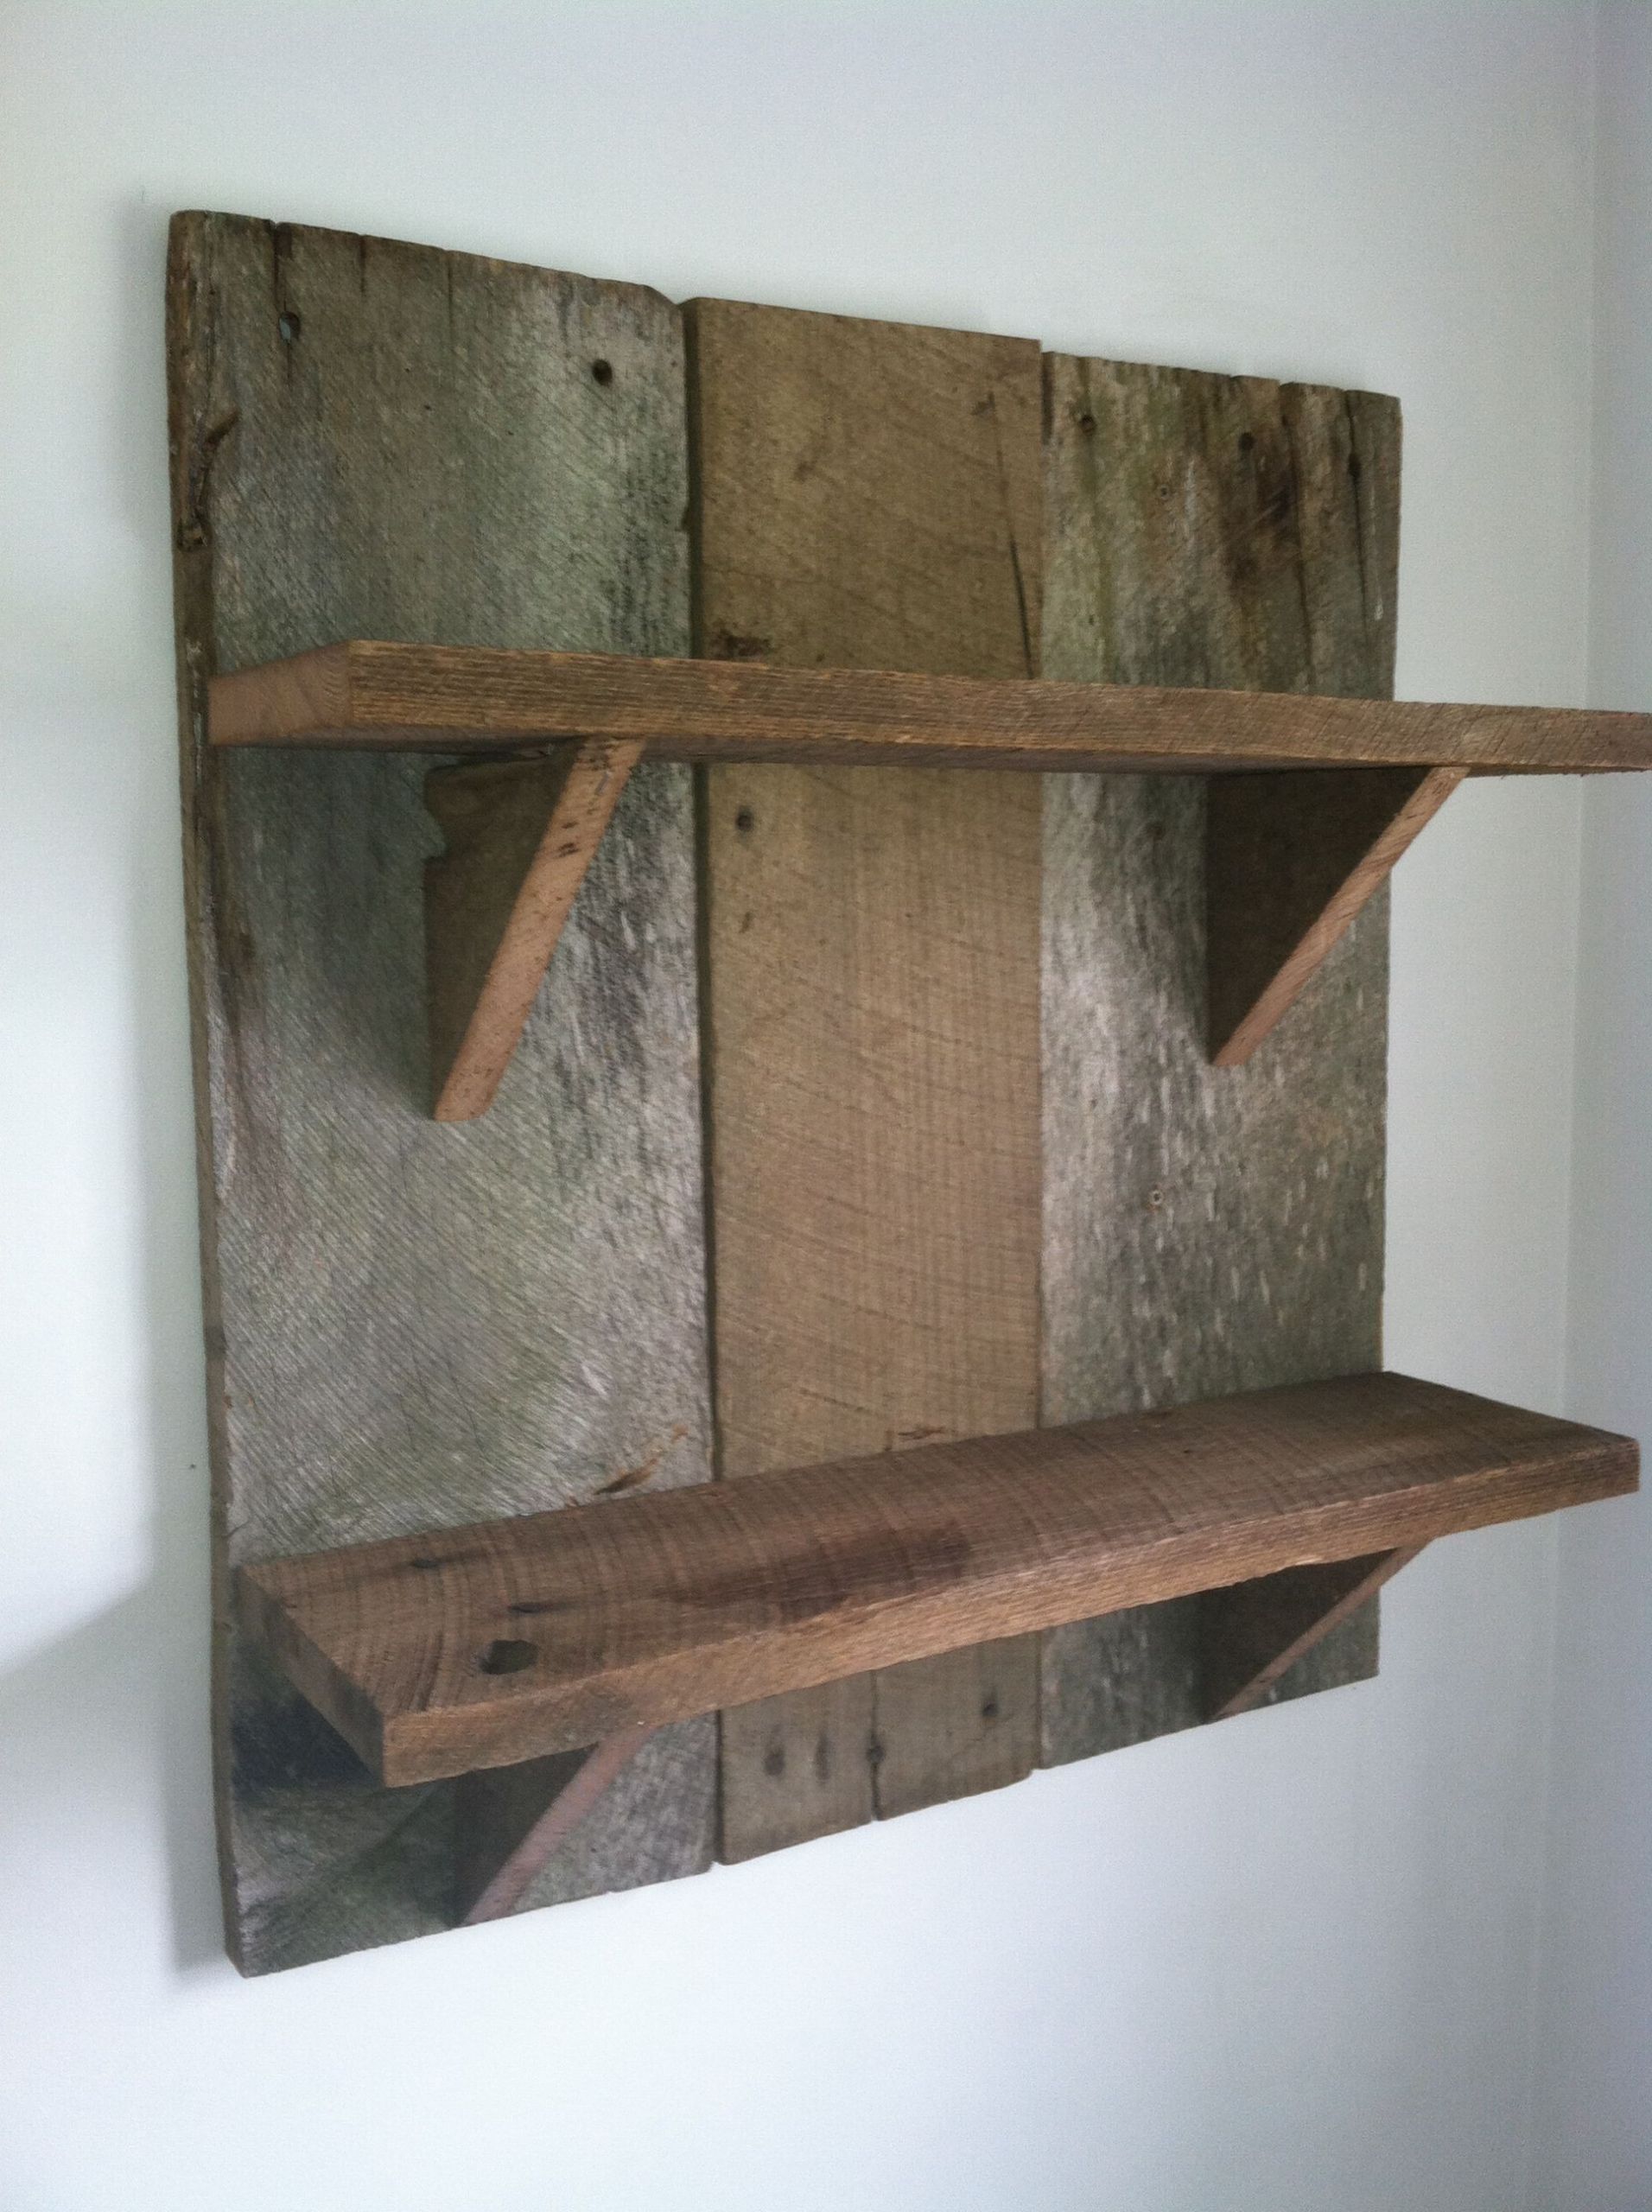 DIY Barnwood Projects
 Barnwood shelf I could make with my son to teach him wood